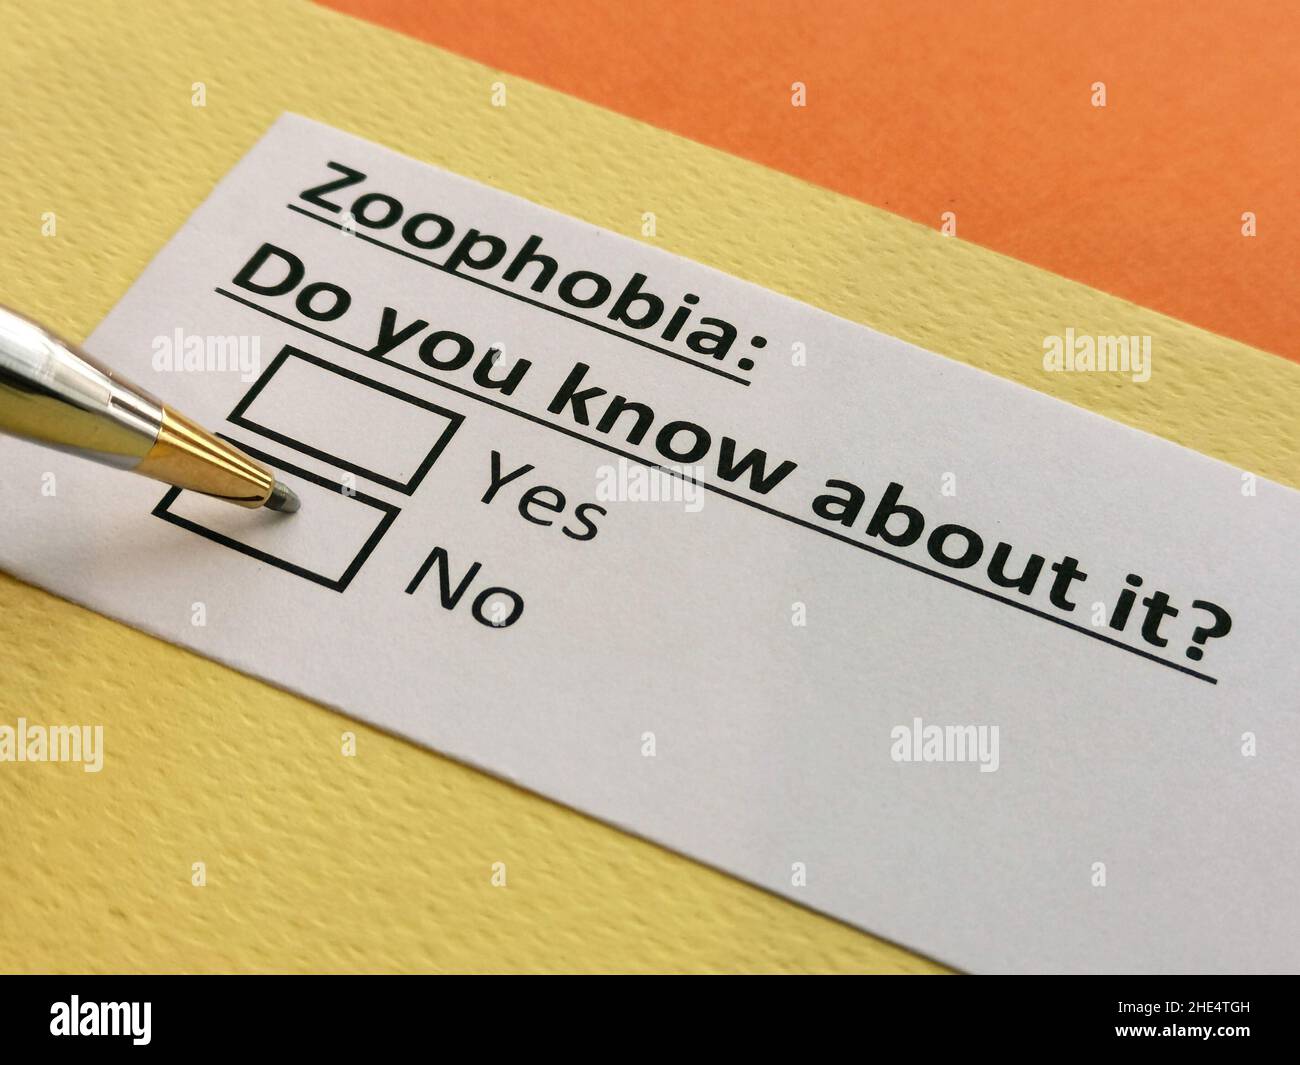 One person is answering question about zoophobia. It means  an abnormal and persistent fear of animals. Stock Photo